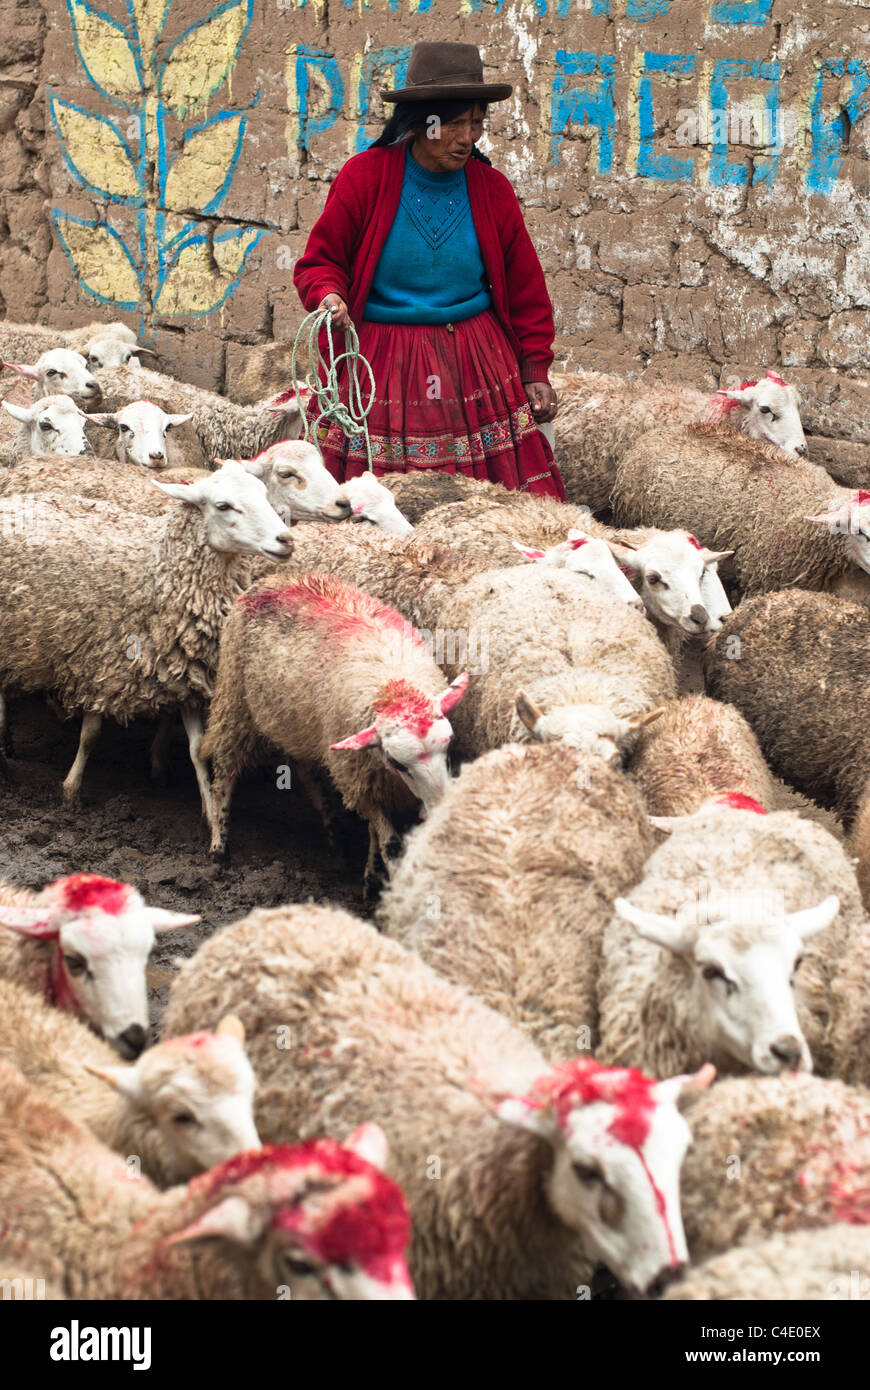 Peasant woman in traditional dress herding sheep branded with red dye through a village in the Andes Stock Photo